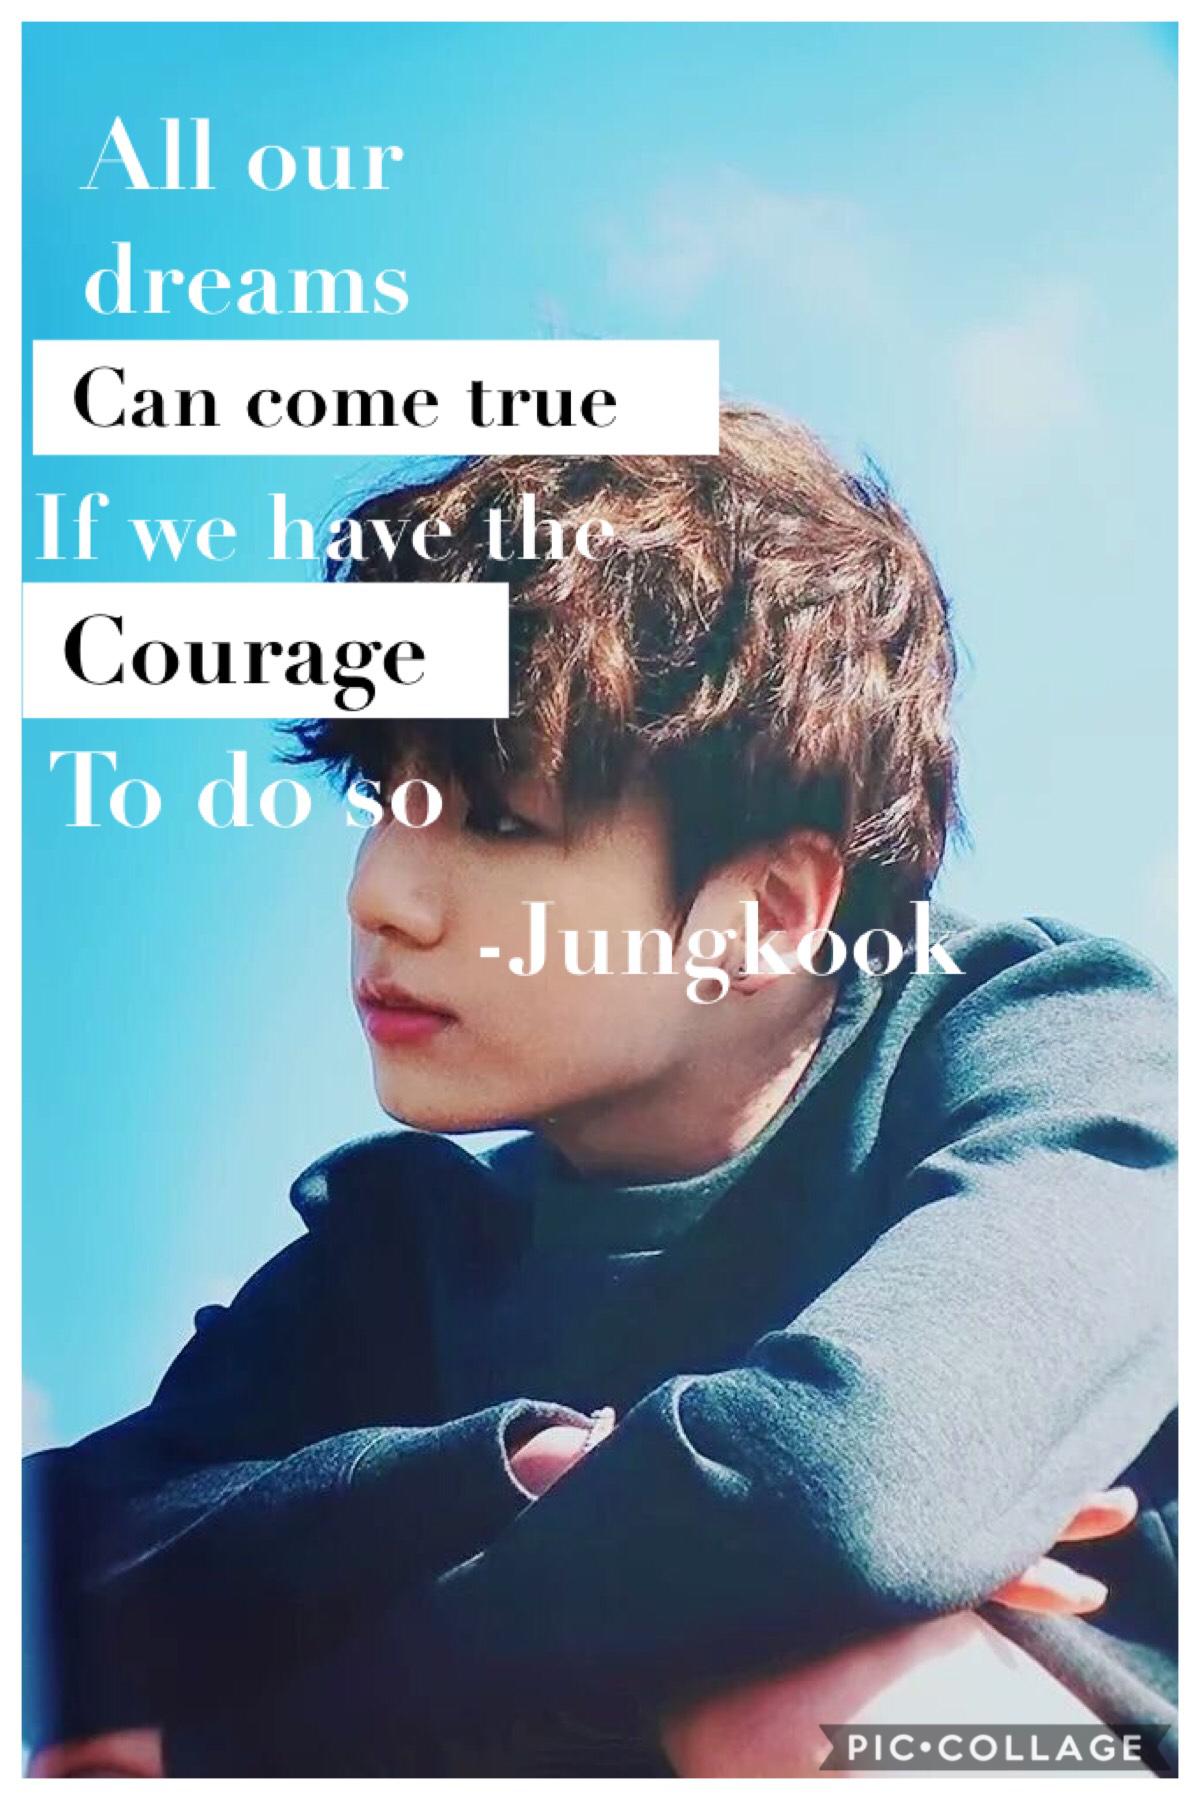 All our dreams can come true if we have the courage to do so 
-Jungkook 